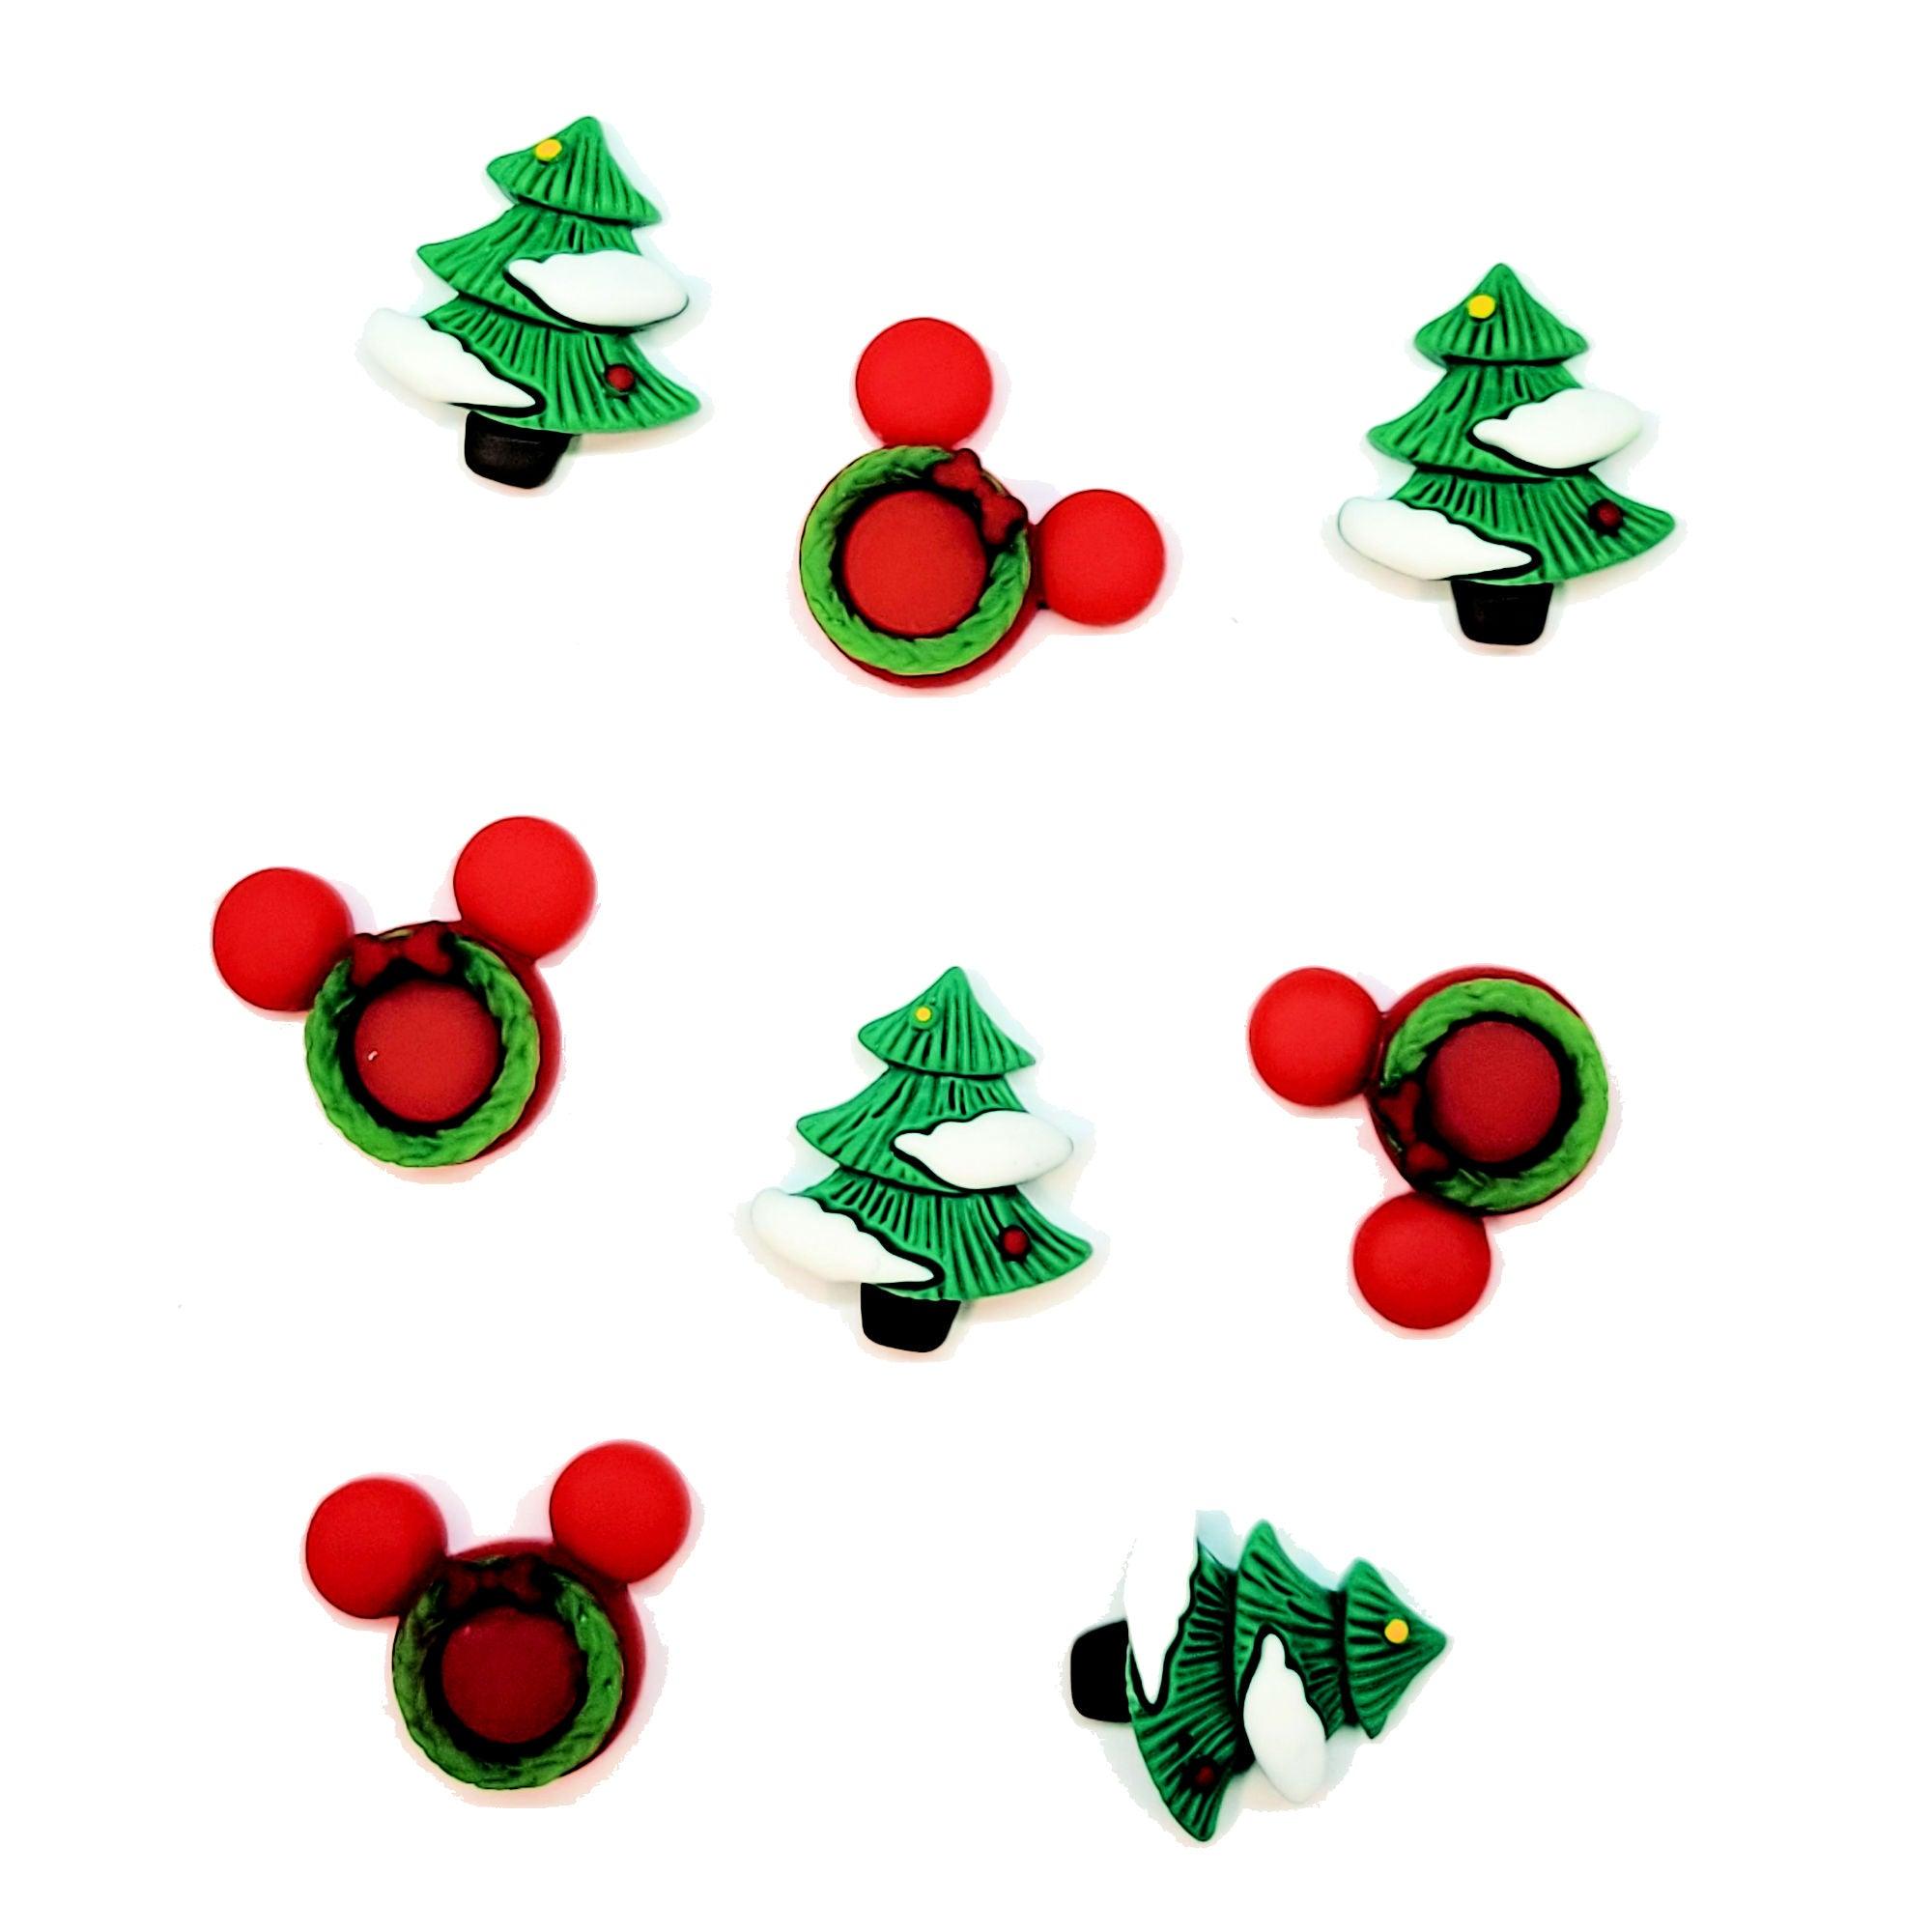 Disneyana Collection Mouse Ear Wreaths & Christmas Trees Flatback Scrapbook Buttons by SSC Designs - 8 Pieces